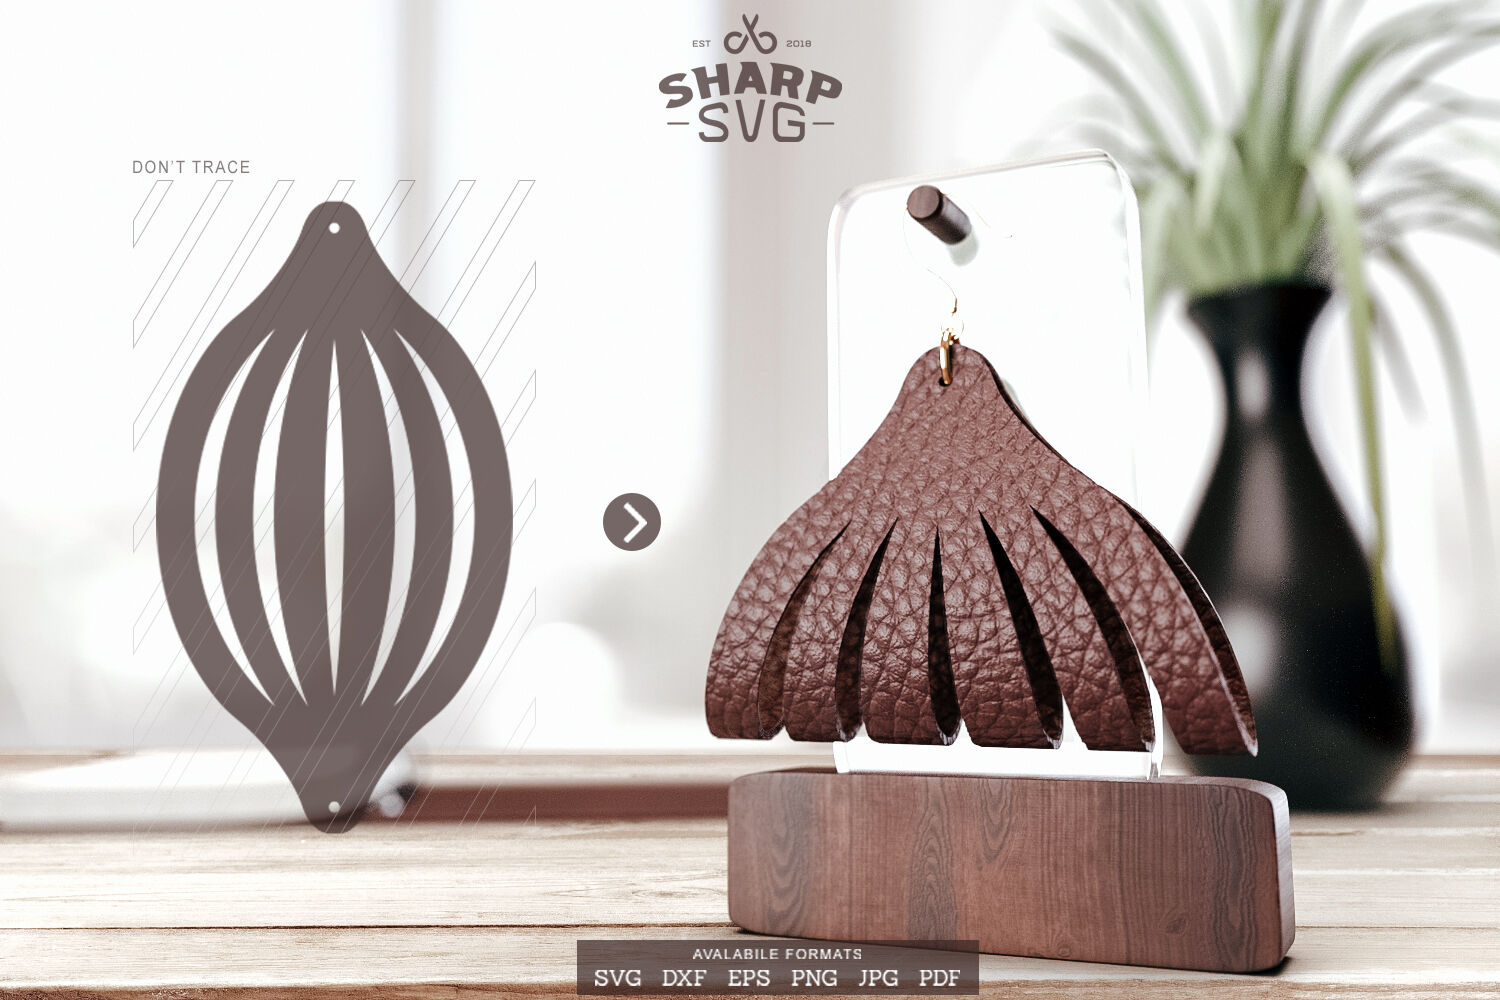 Folded Earring SVG - Leather Twisted Earrings Cut Template By SharpSVG